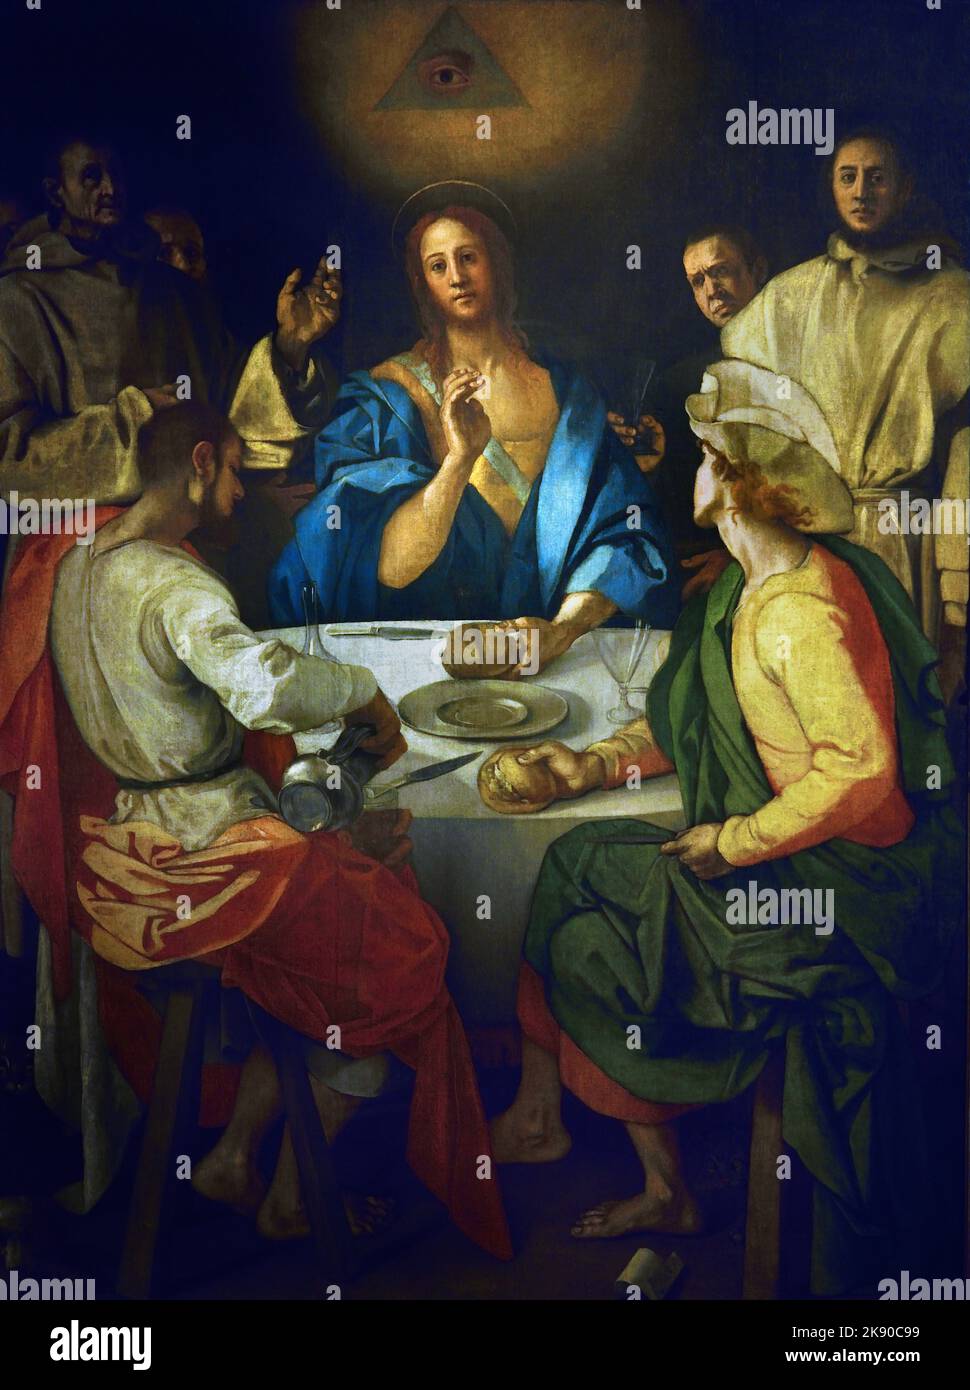 Supper at Emmaus Jacopo Carucci, known as Pontormo (Pontorme, Empoli, 1494 – Florence, 1552) , Florence, Italy. ( The painting is inspired by the engraving of the same subject in Dürer’s Small Passion series. ) Stock Photo